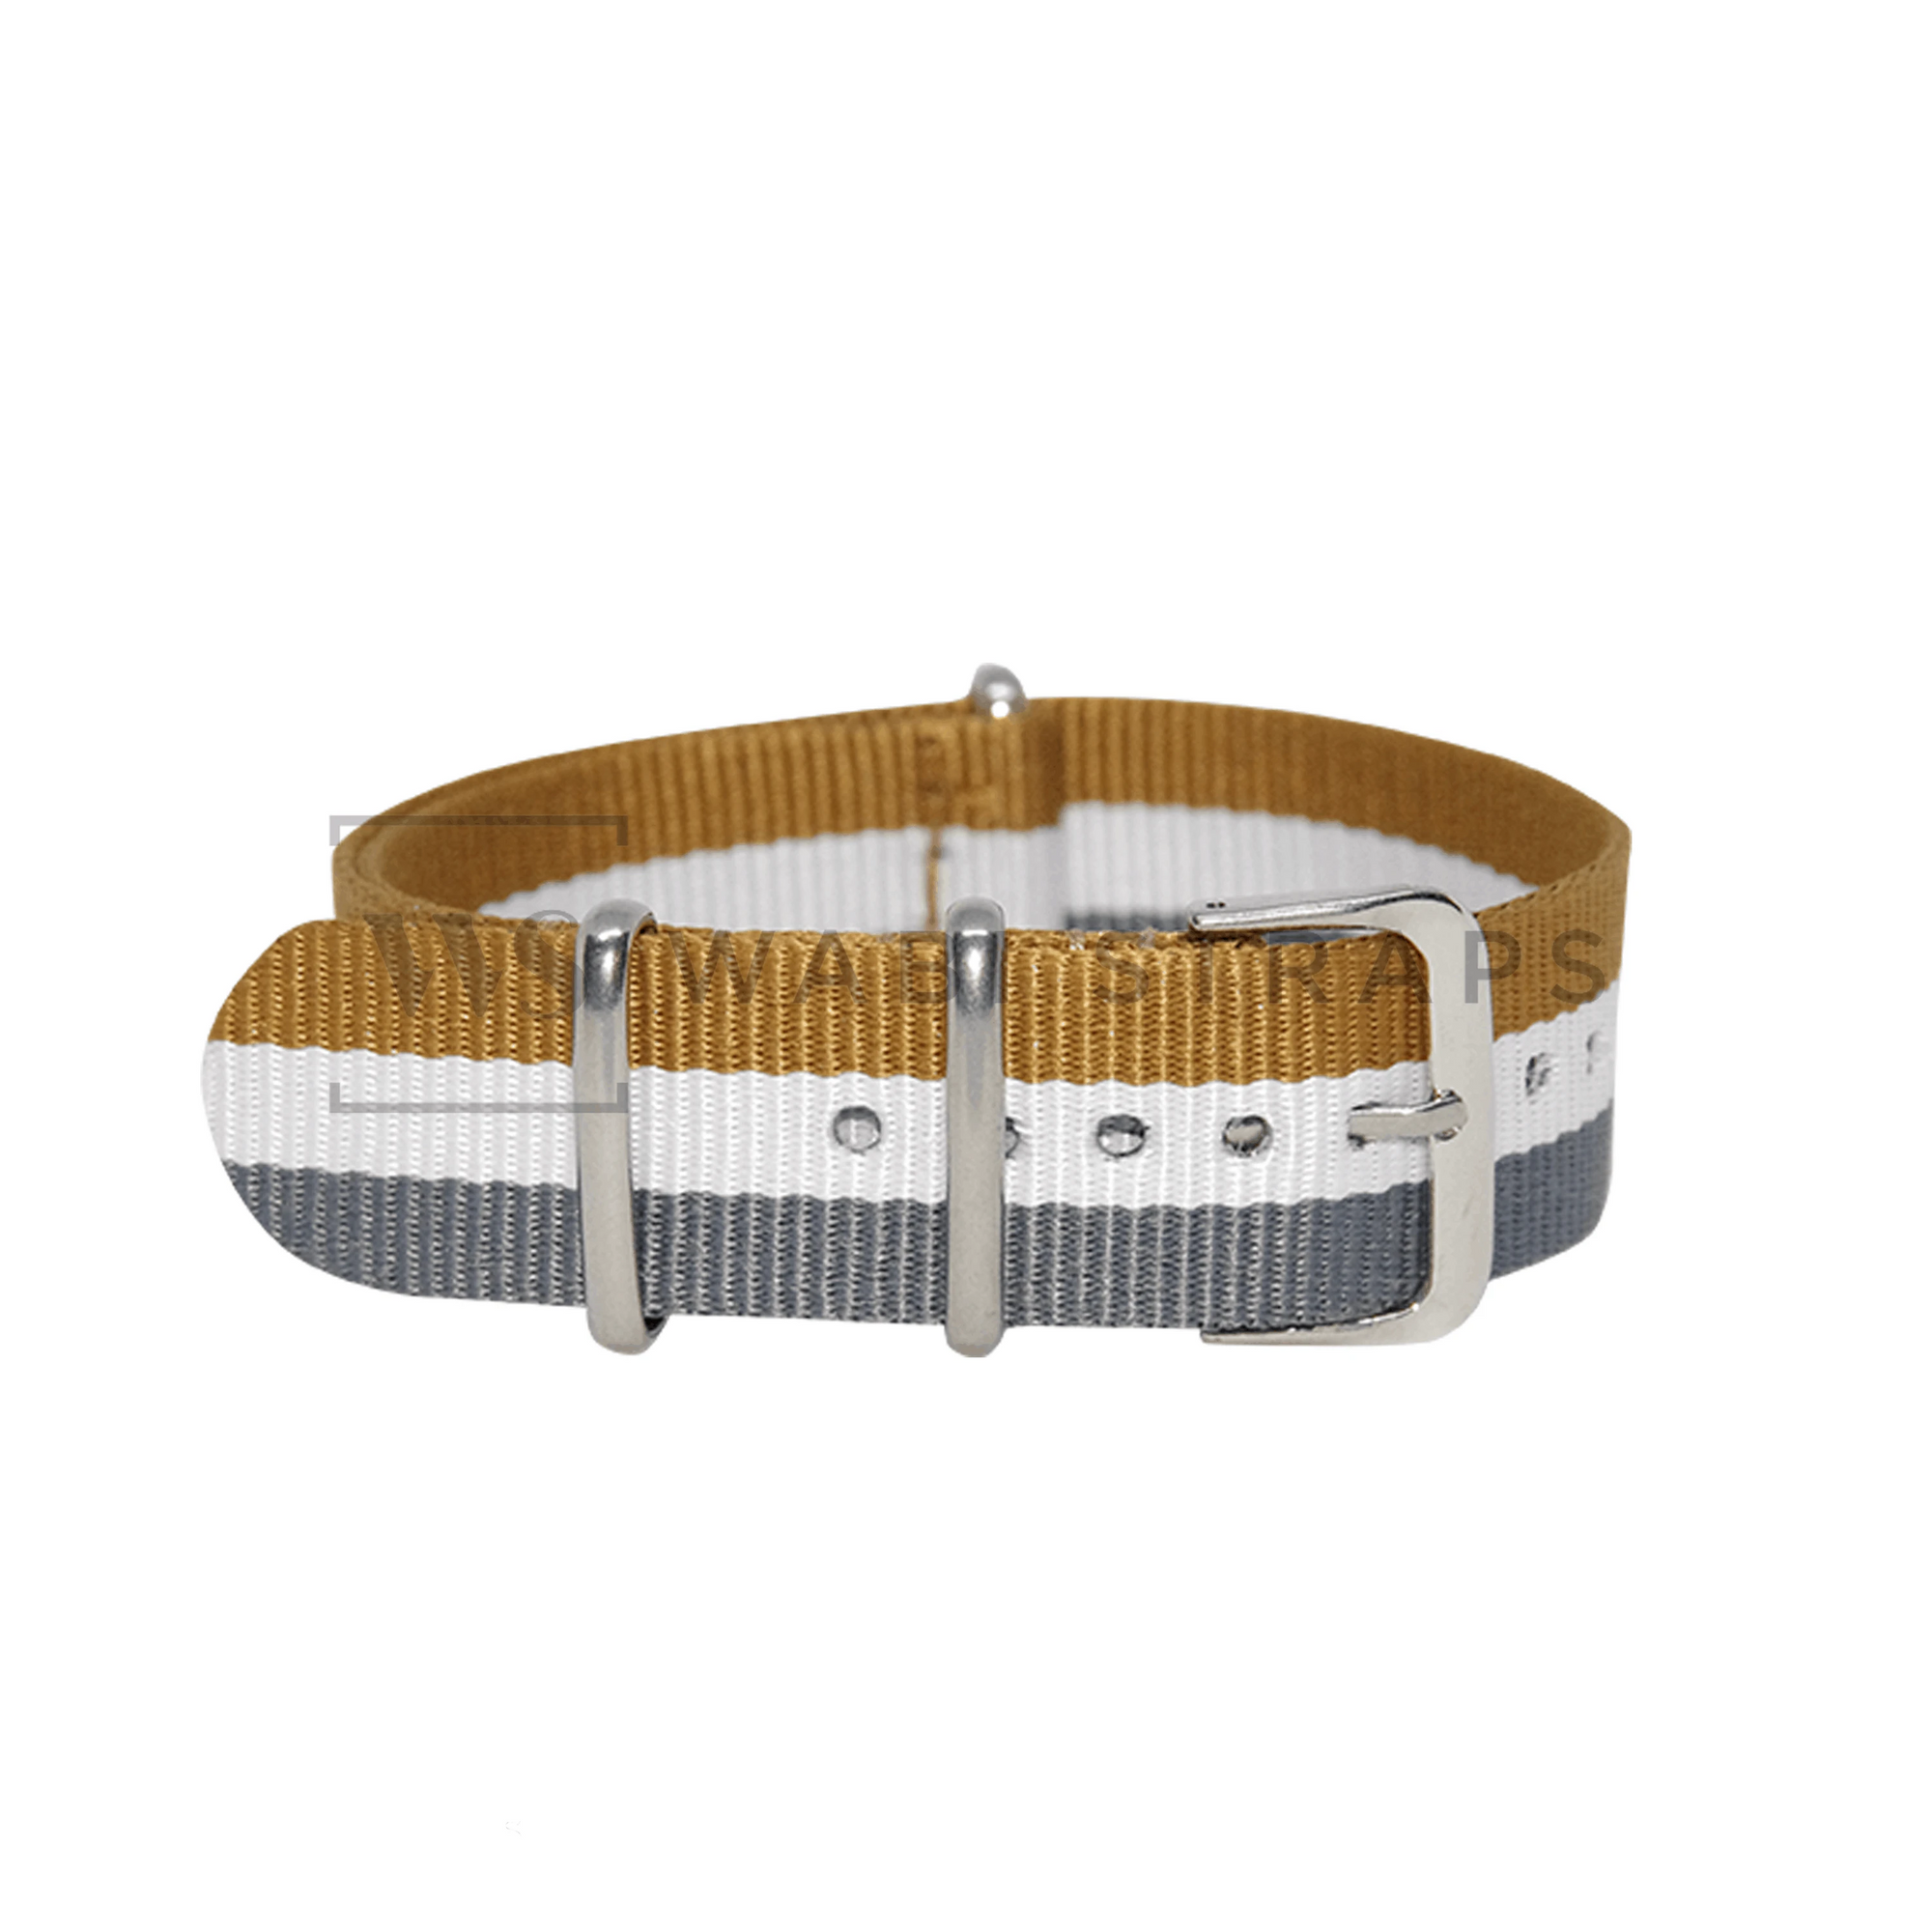 Gold, White & Silver Classic British Military Watch Strap